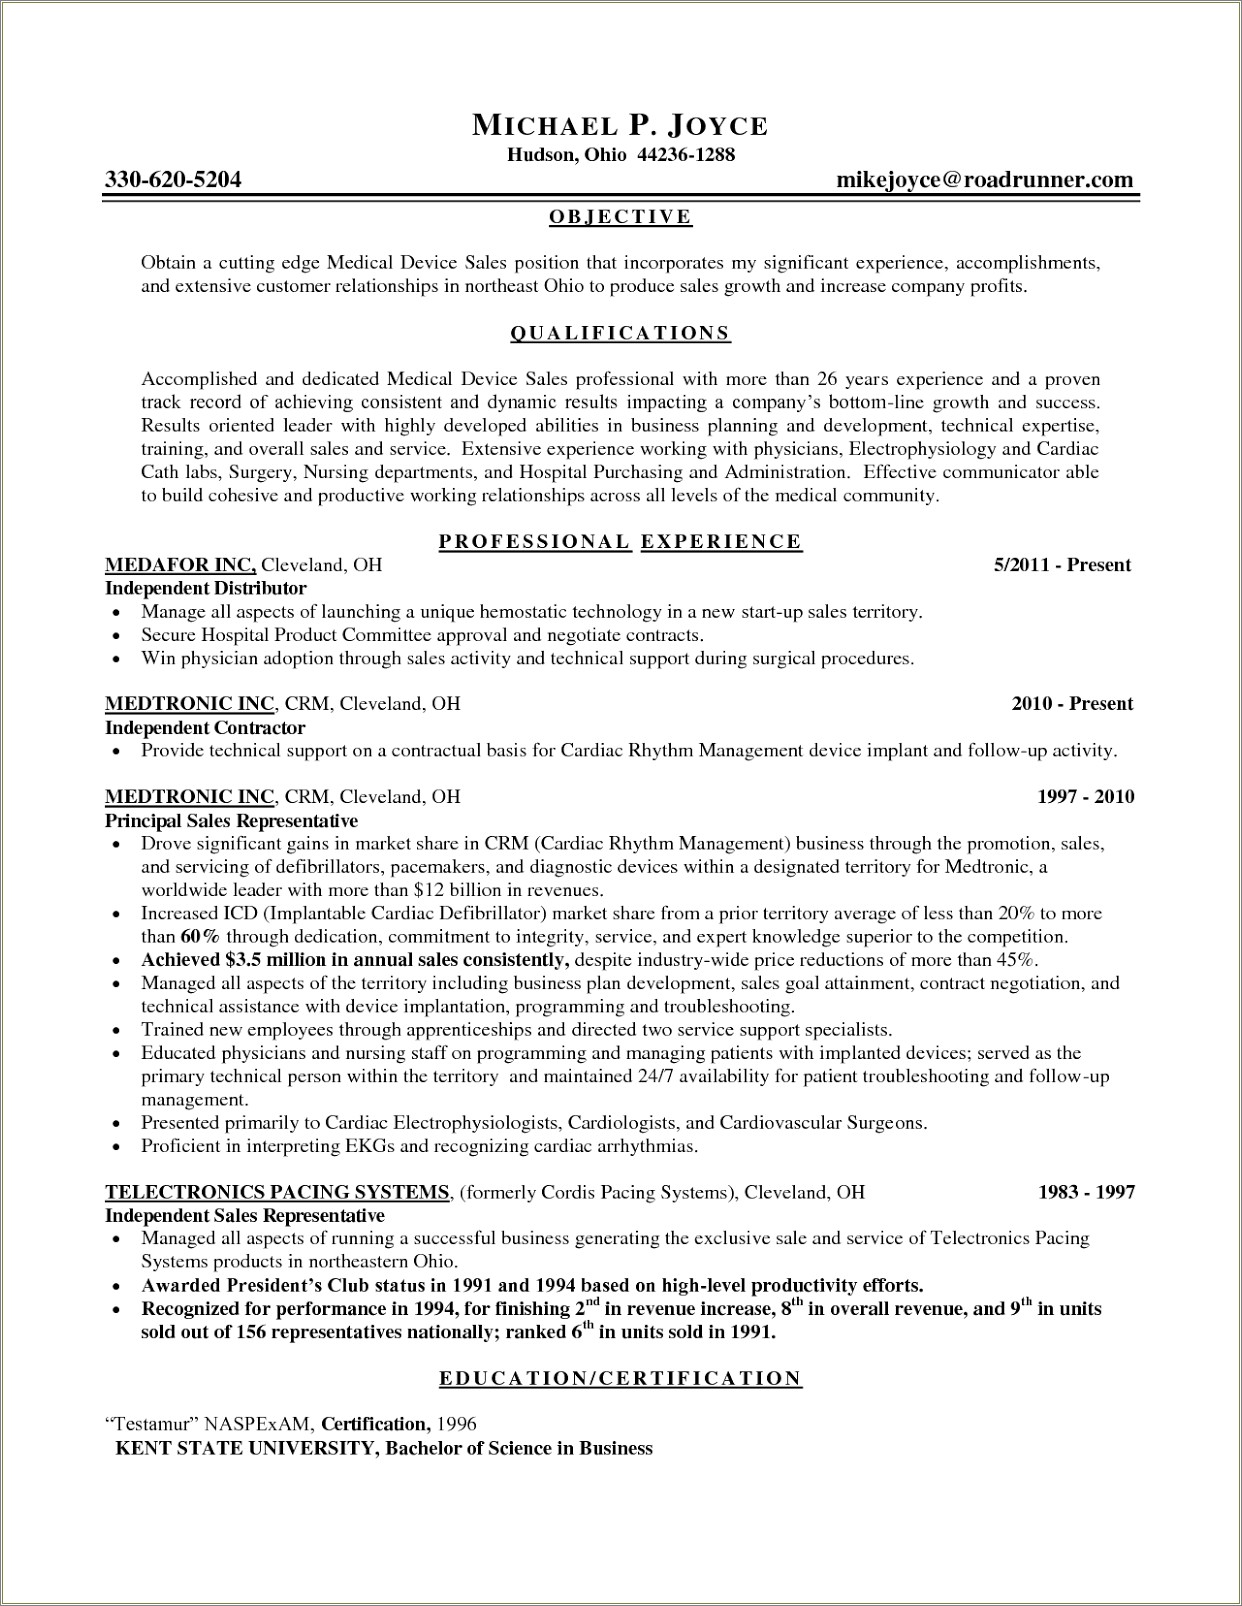 Resume Objective For Territory Sales Manager